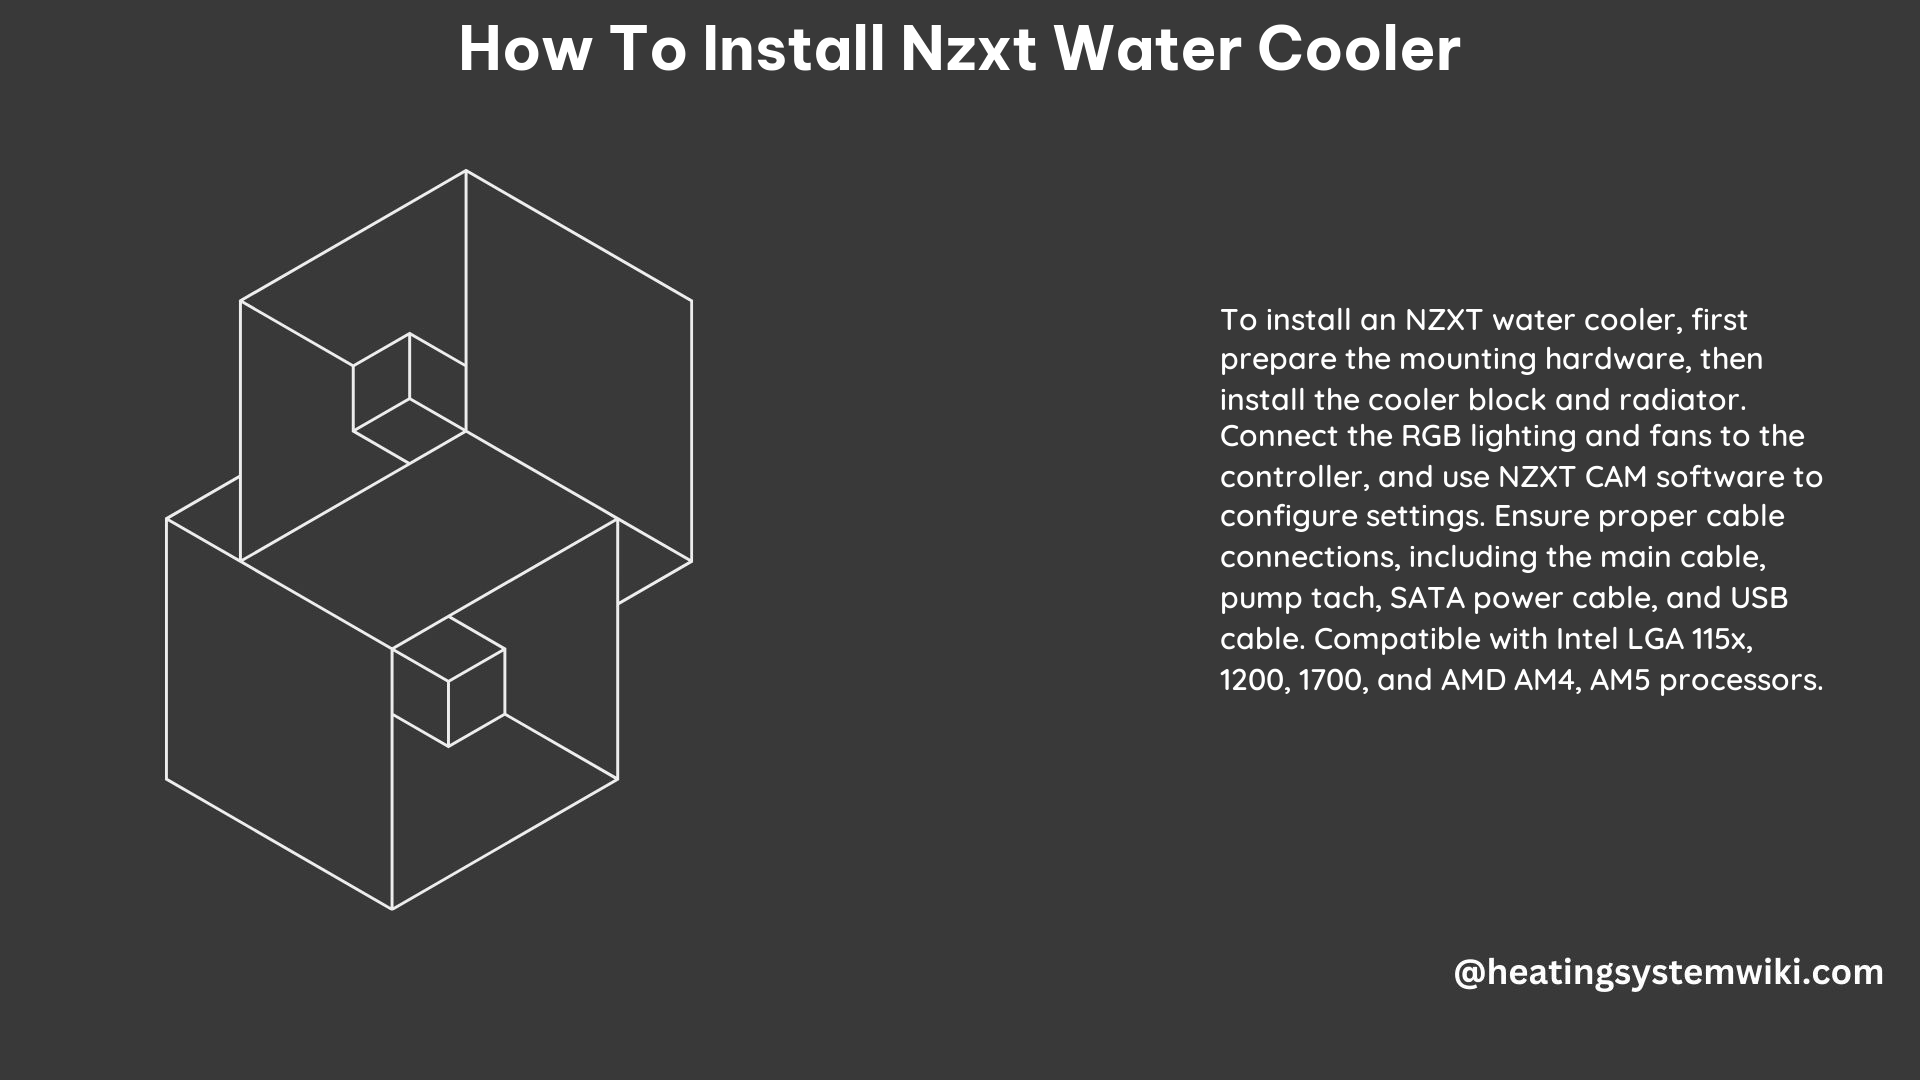 How to Install Nzxt Water Cooler